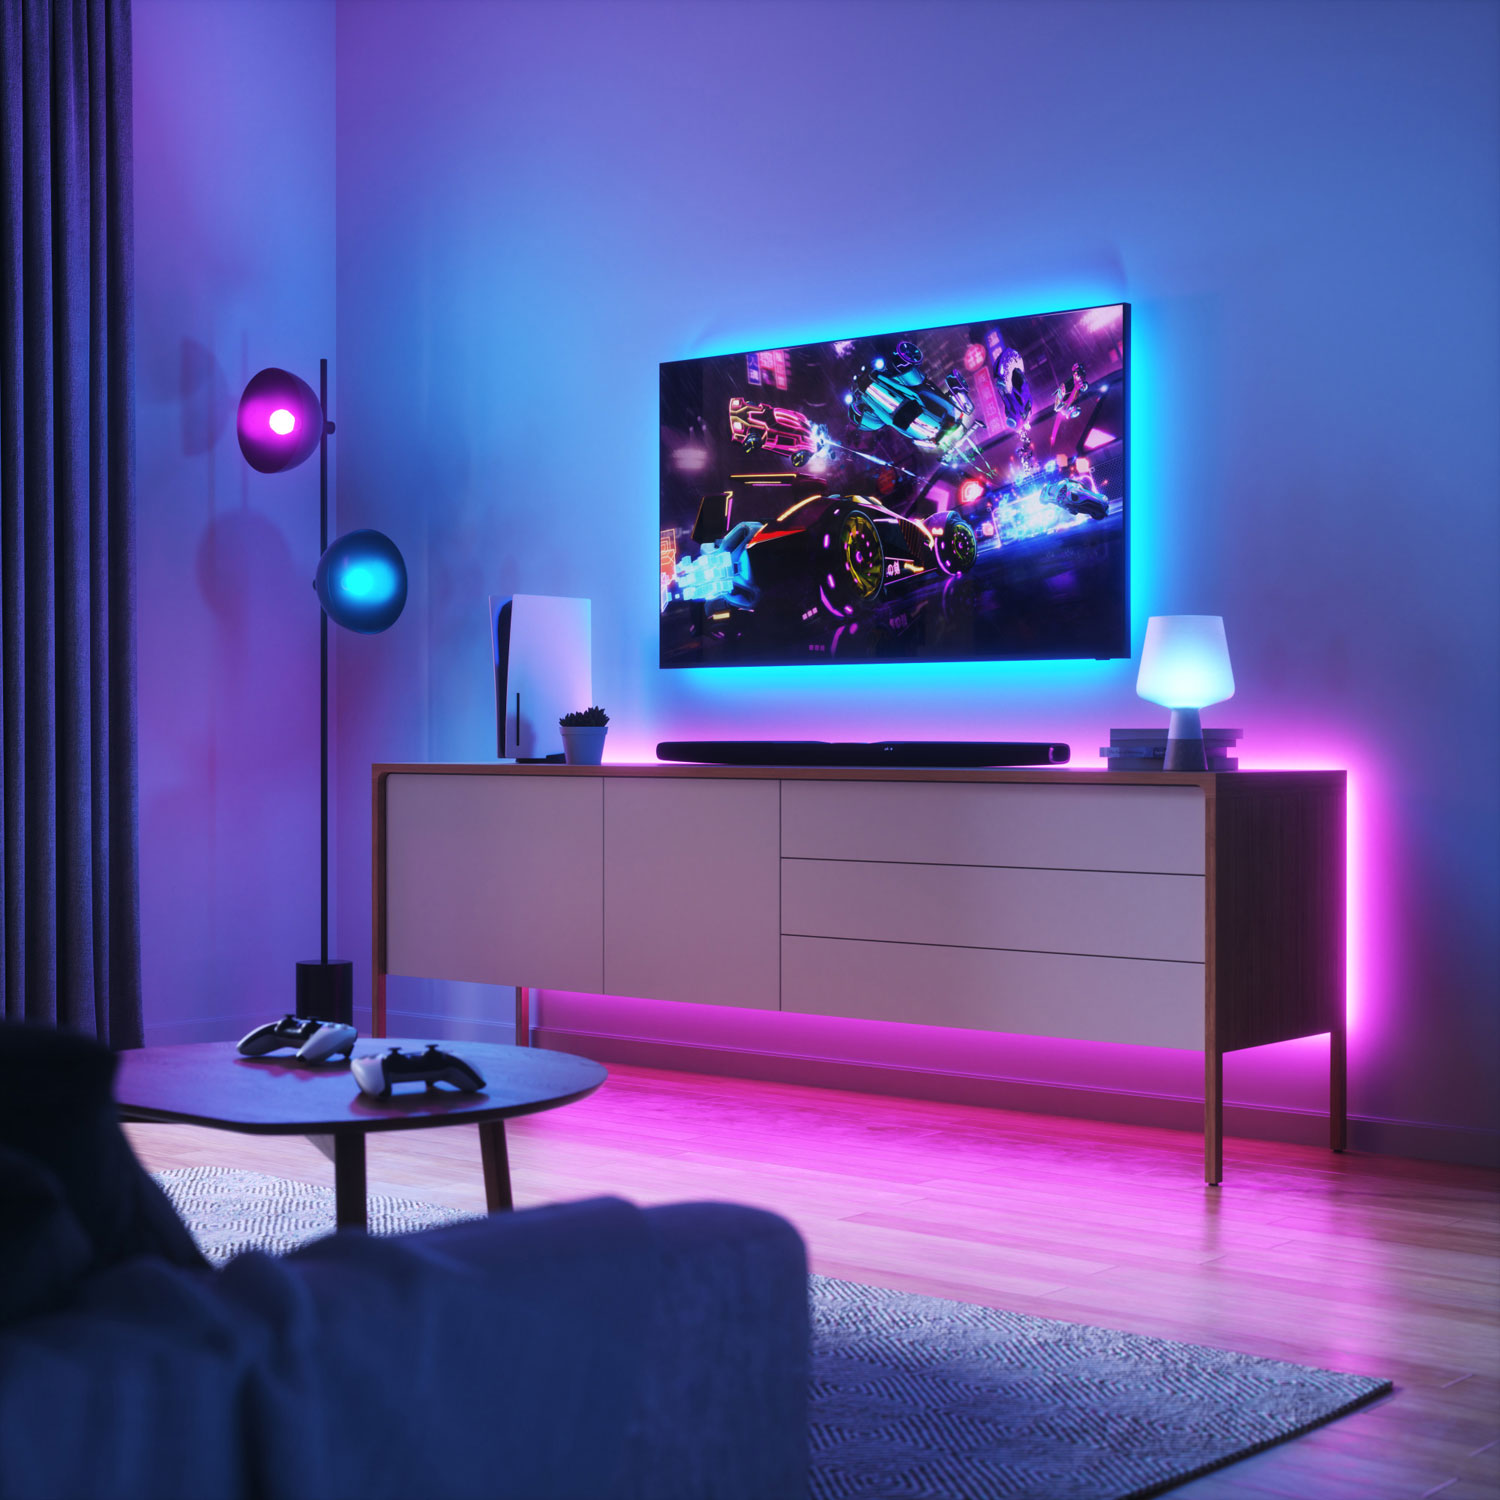 Smart lights bring TV shows to life